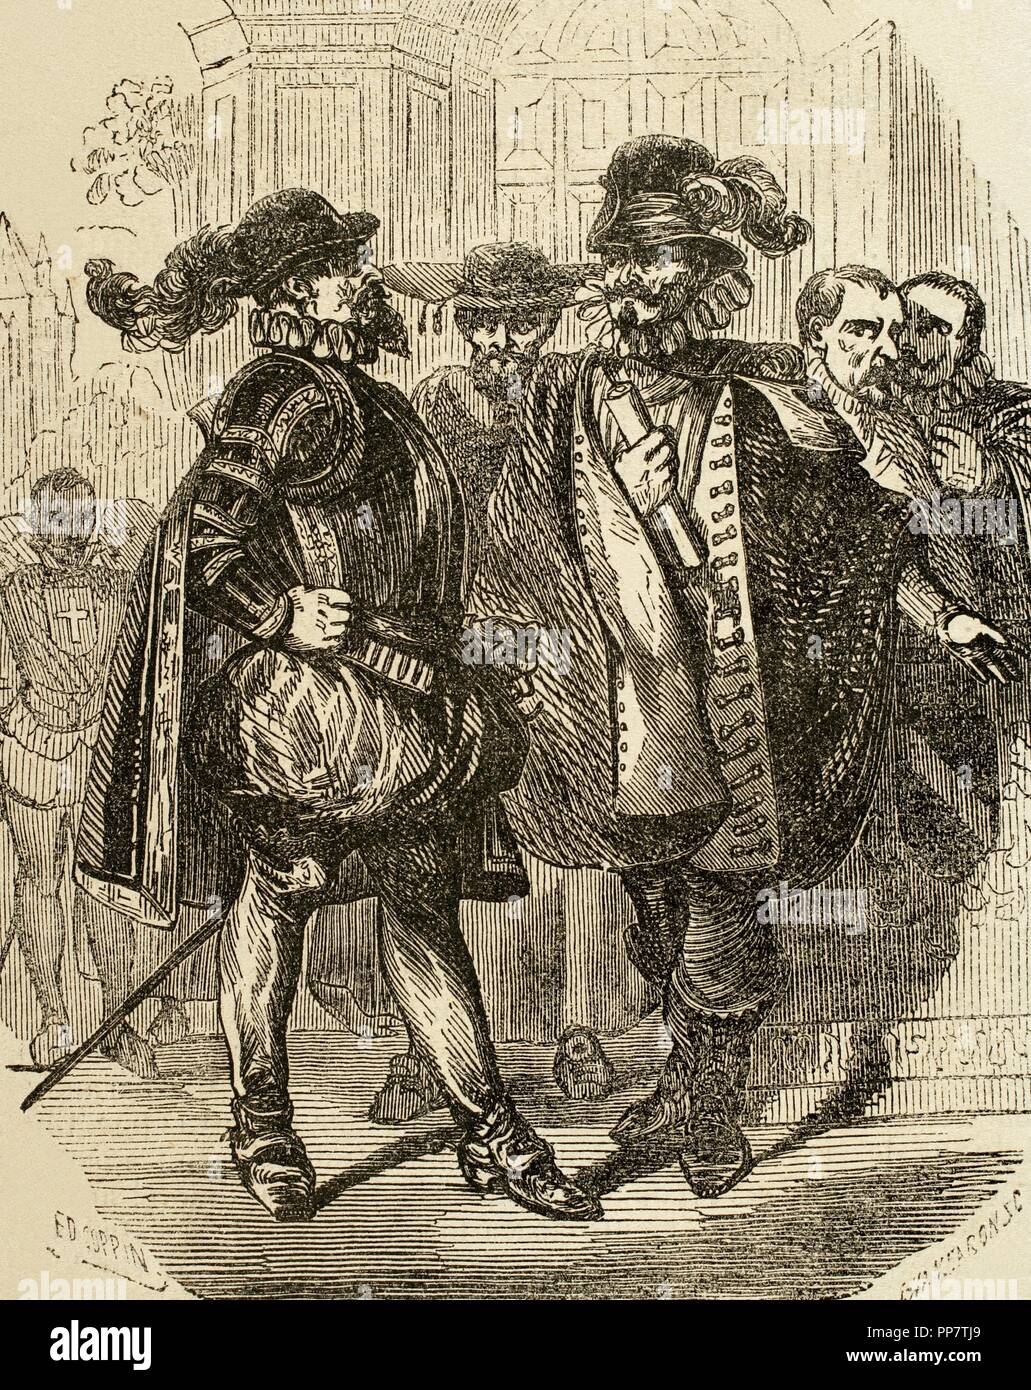 Charles of Lorraine, Duke of Mayenne (1554-1611). French nobleman. Engraving depicting meeting between the Duke of Mayenne and the Spanish envoys. 19th century. Stock Photo